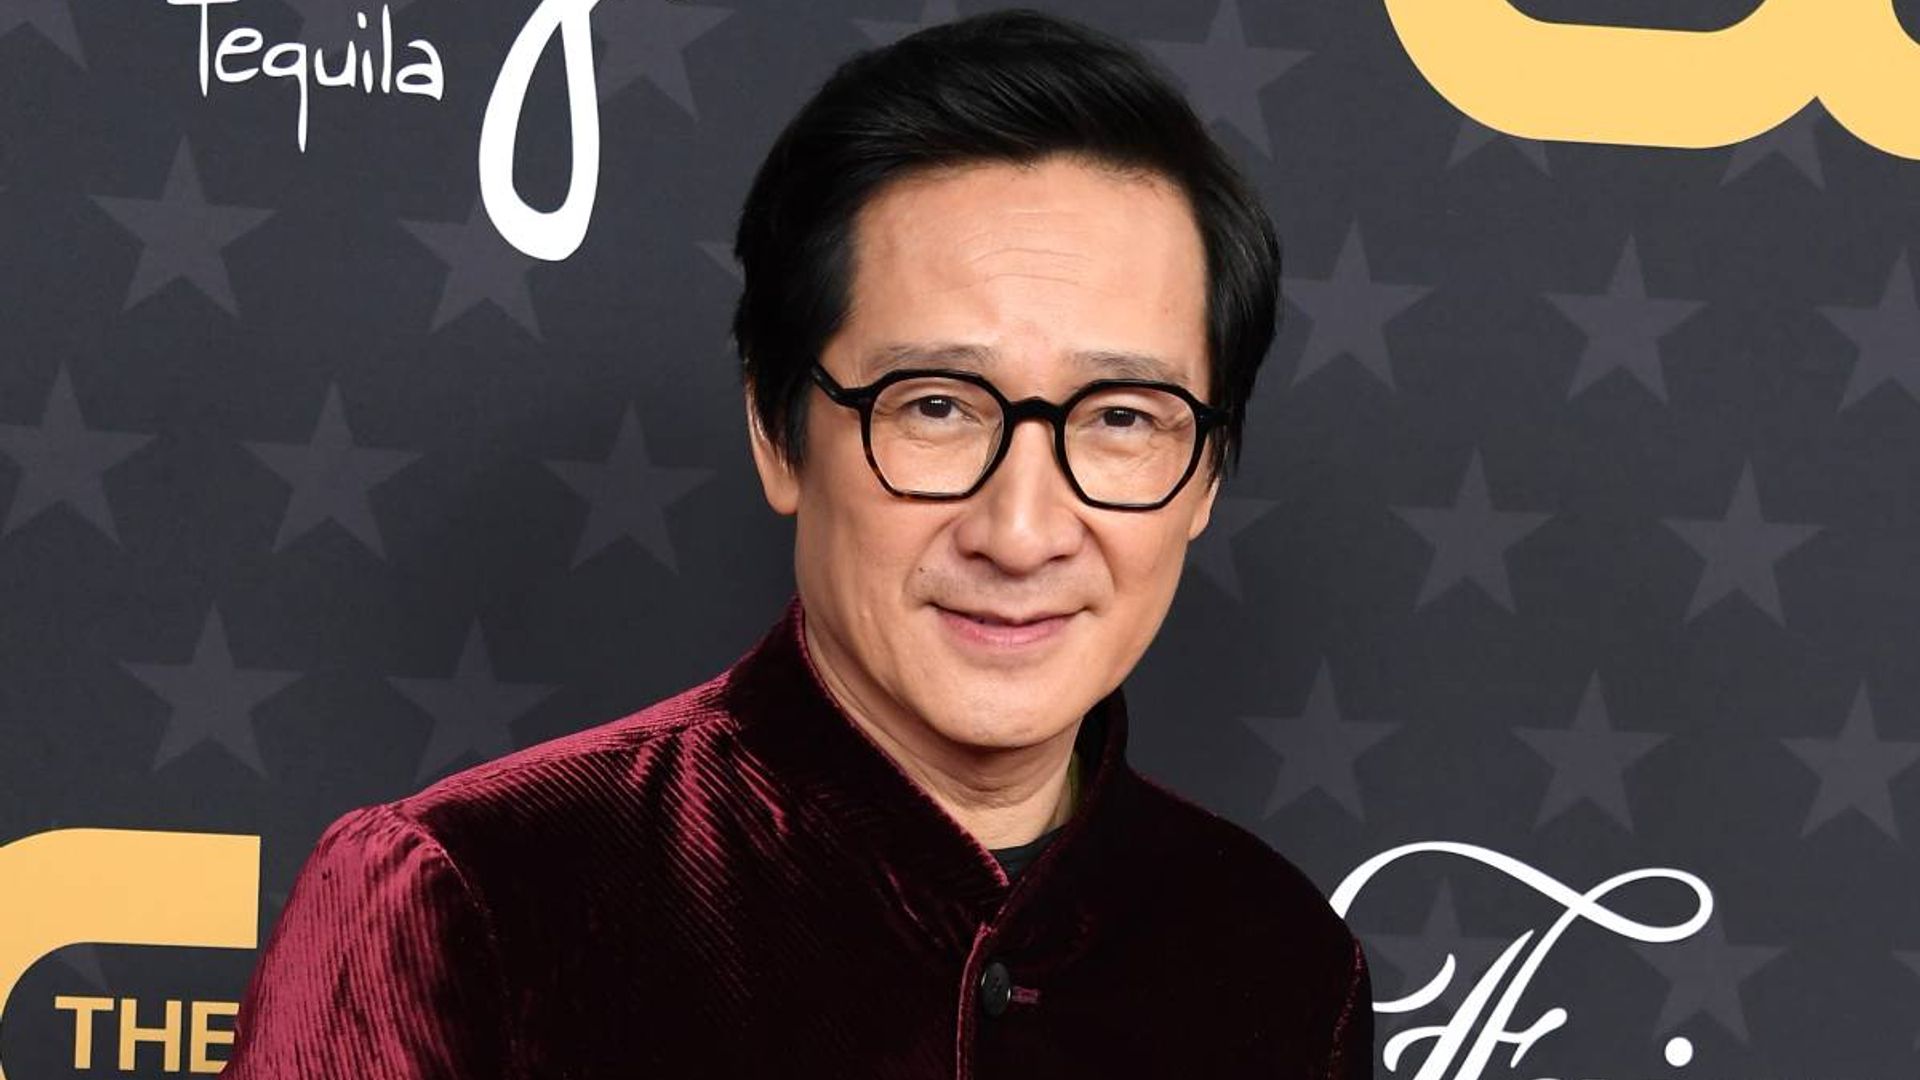 All we know about Oscars nominee Ke Huy Quan as he takes Hollywood by storm